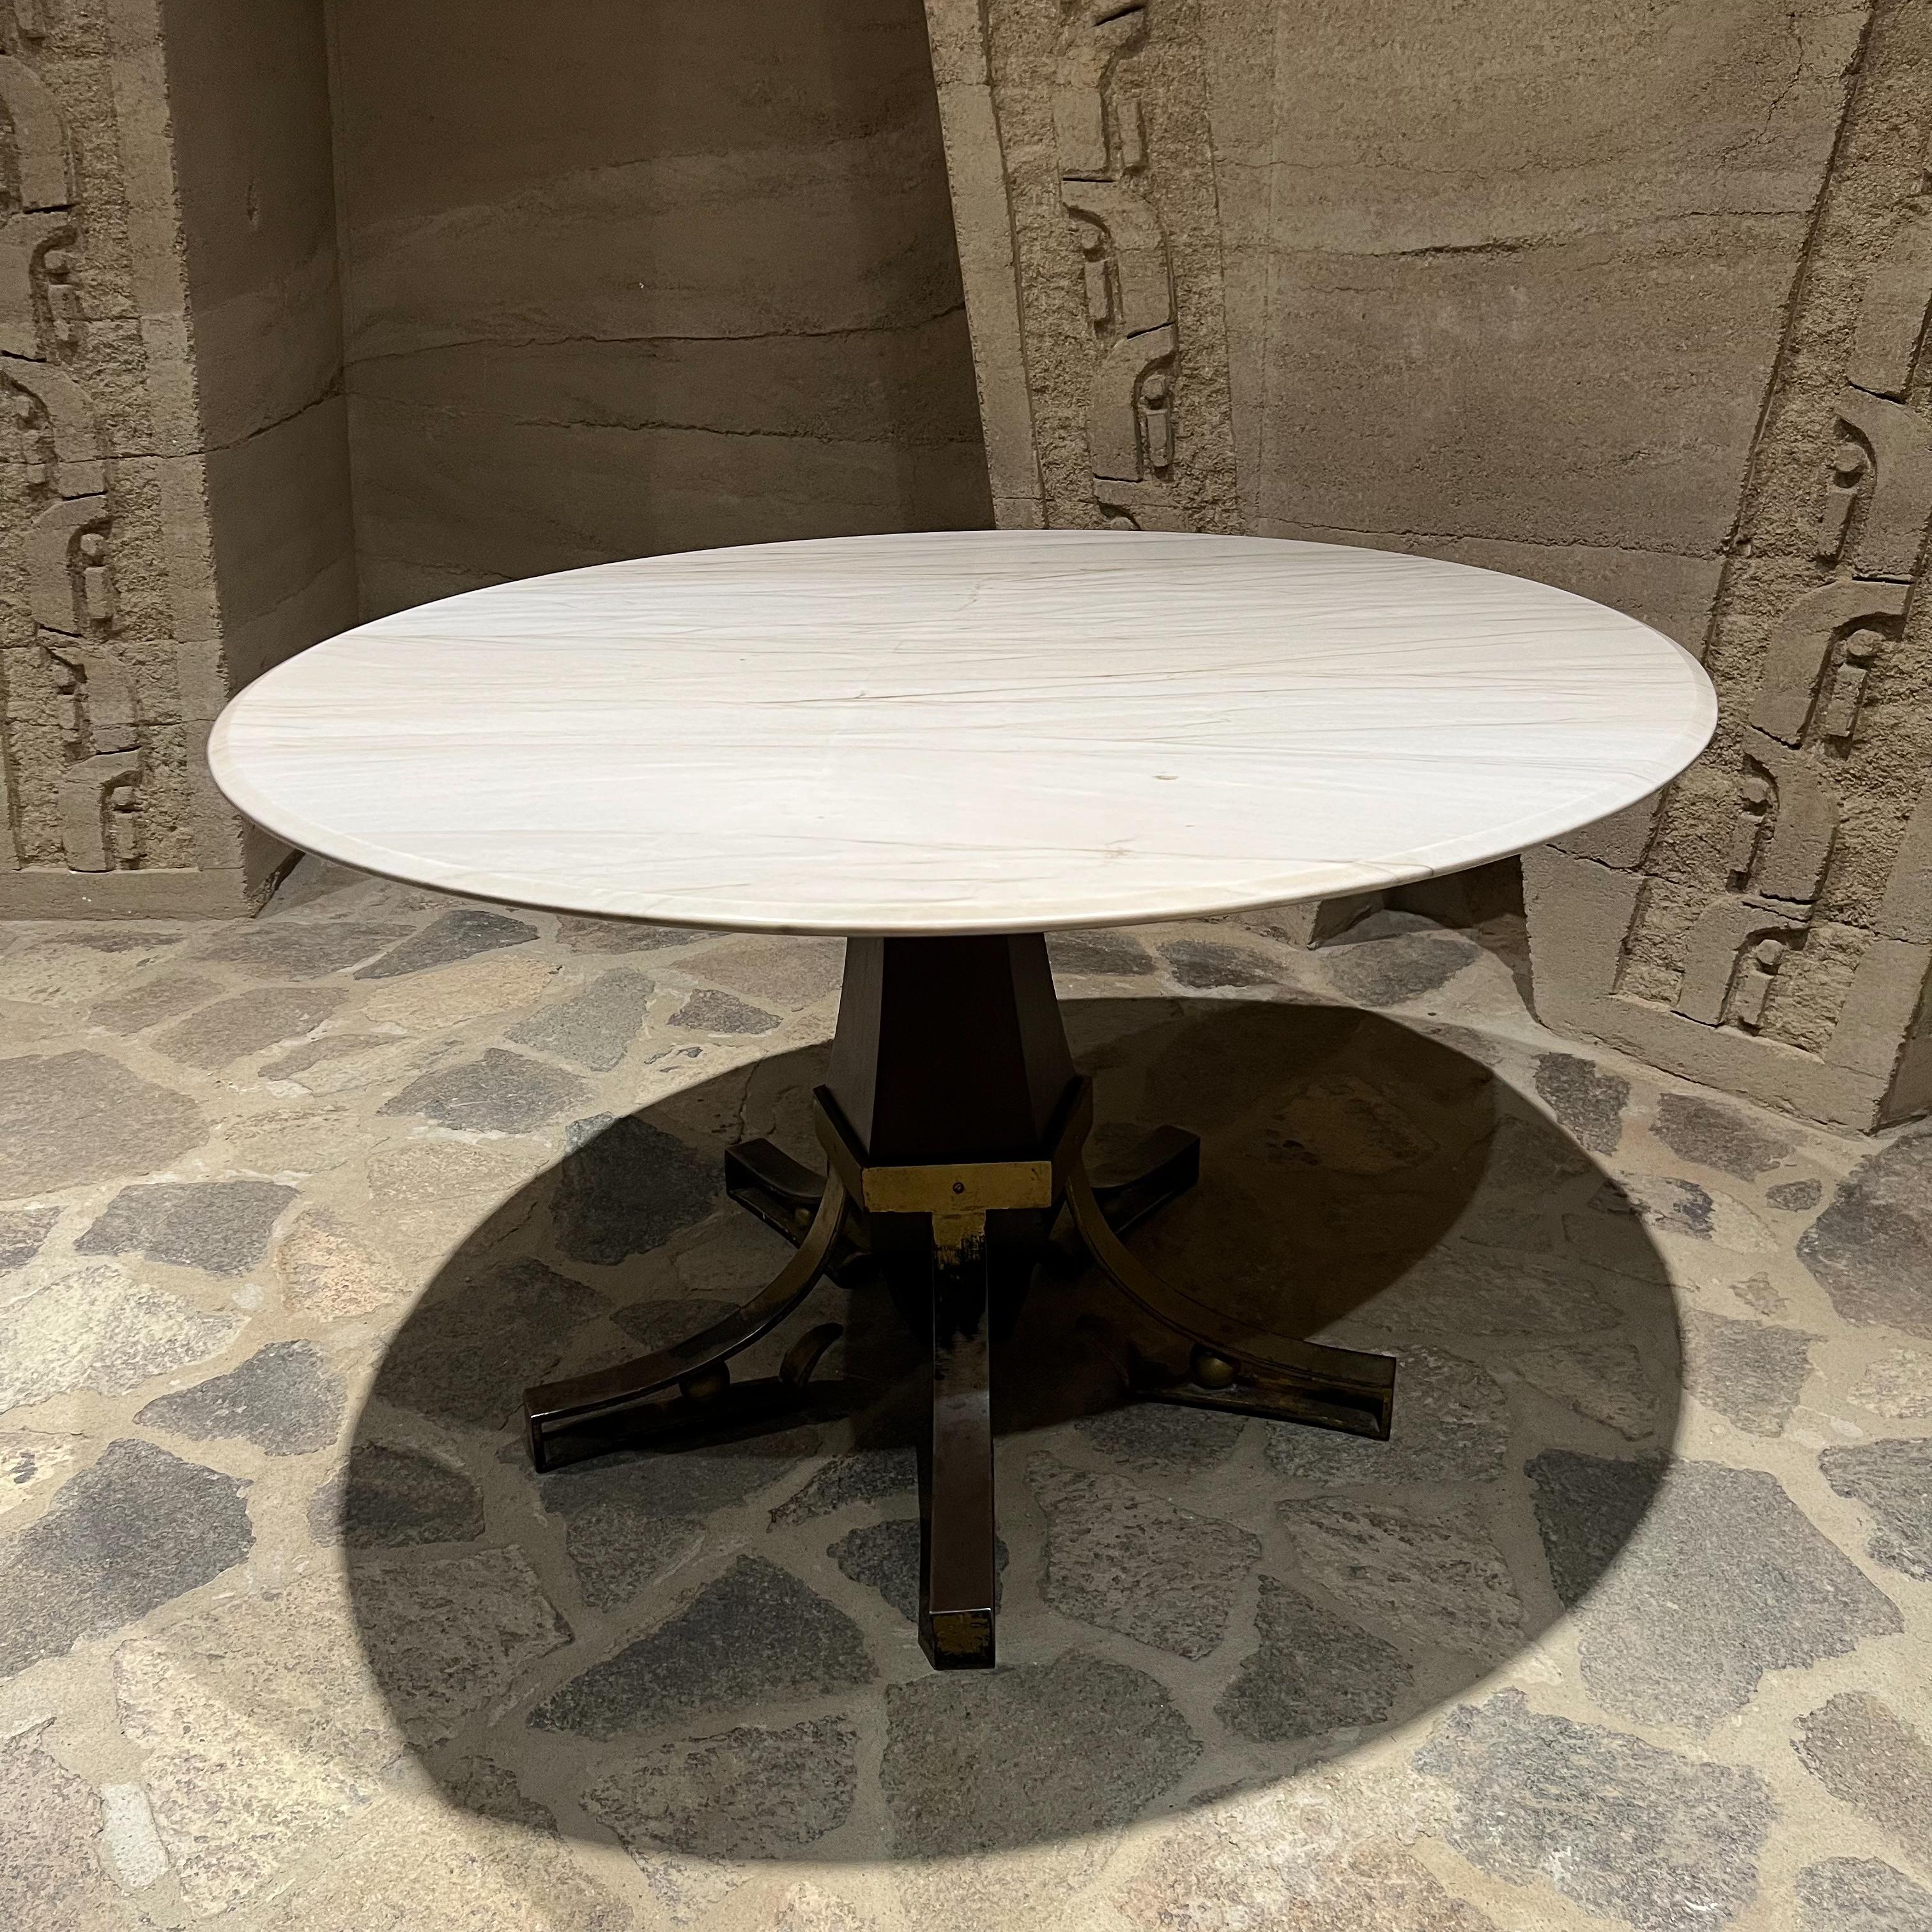 Mid-20th Century Modernist Dining Table in White Marble Sculptural Base Arturo Pani Mexico City For Sale